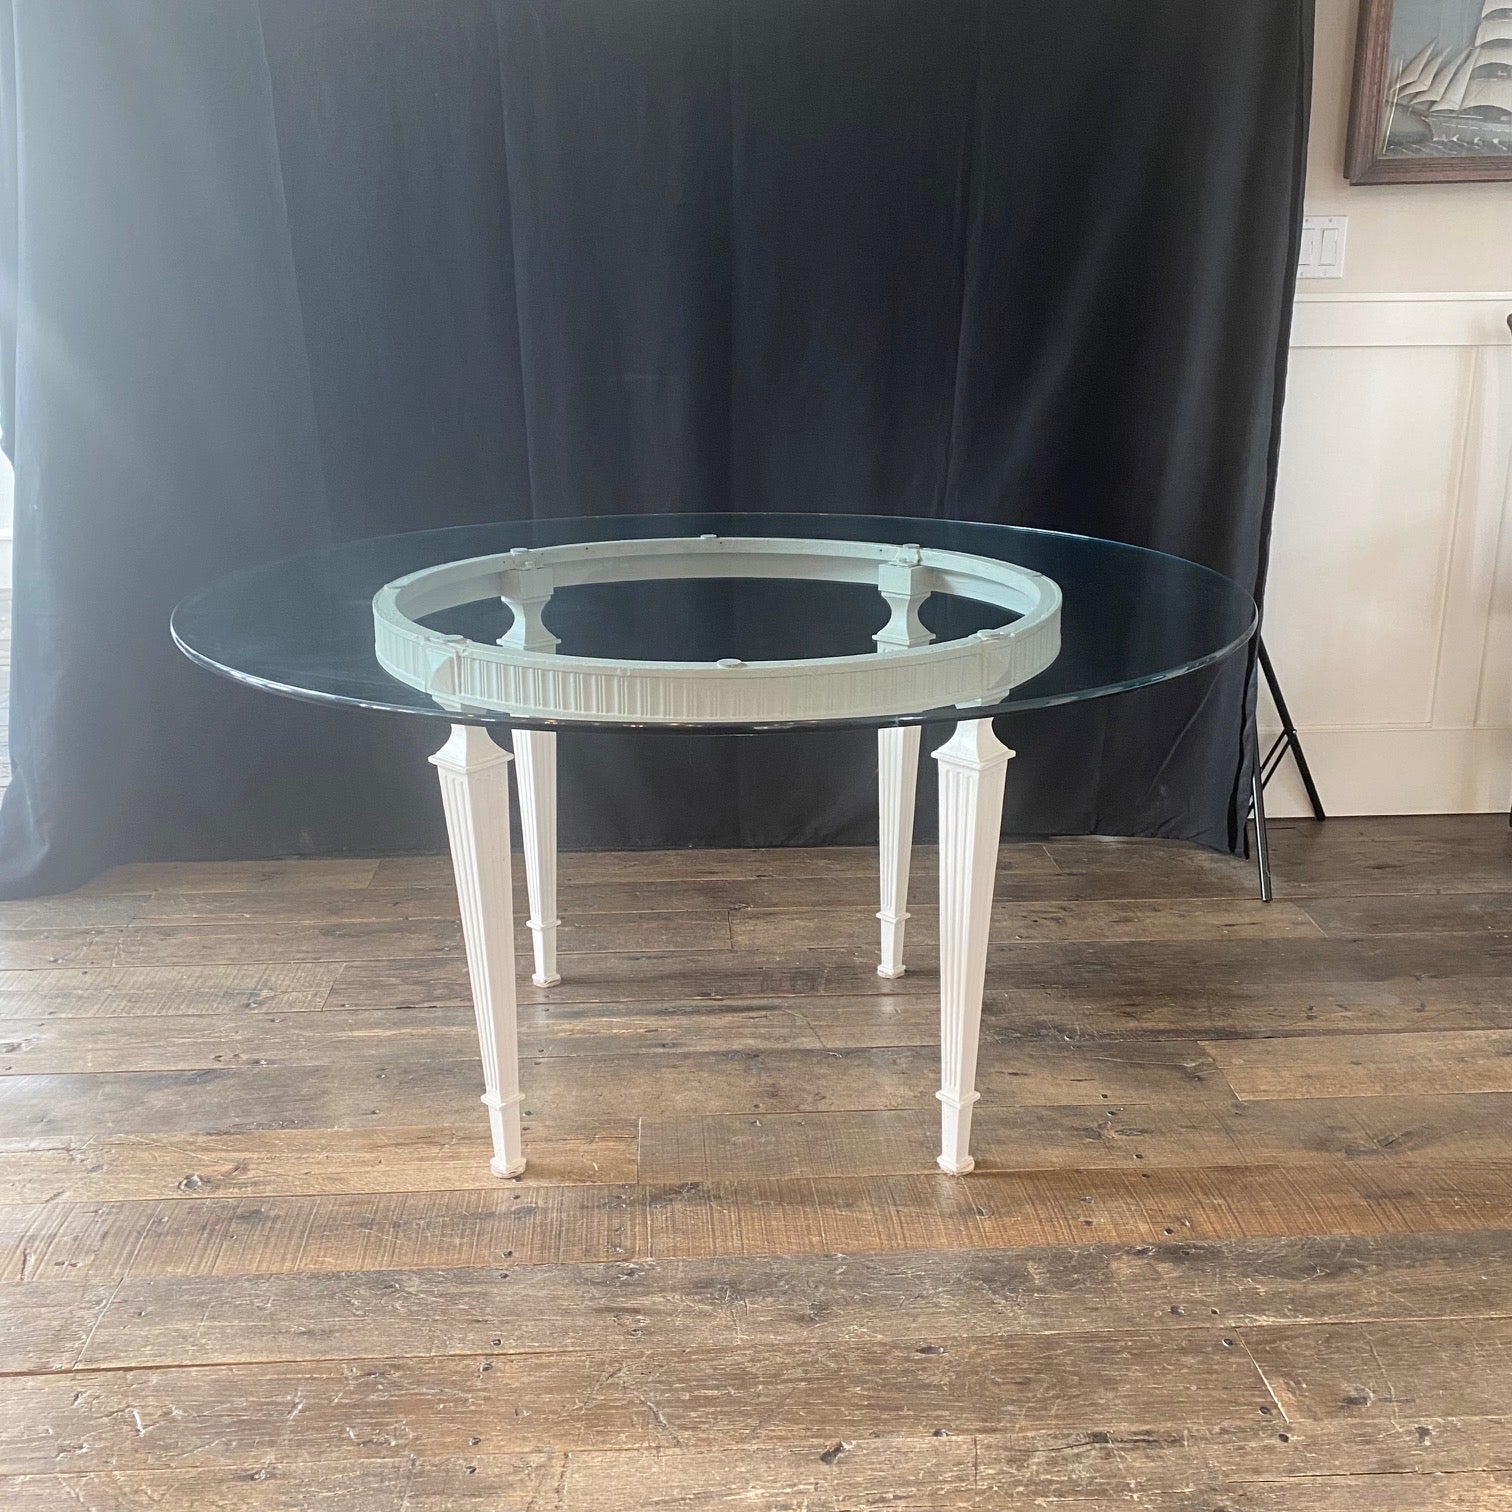 Classic French Louis XVI round glass and metal indoor or outdoor dining table or garden table. Strong and durable with really great lines! The glass top is 54